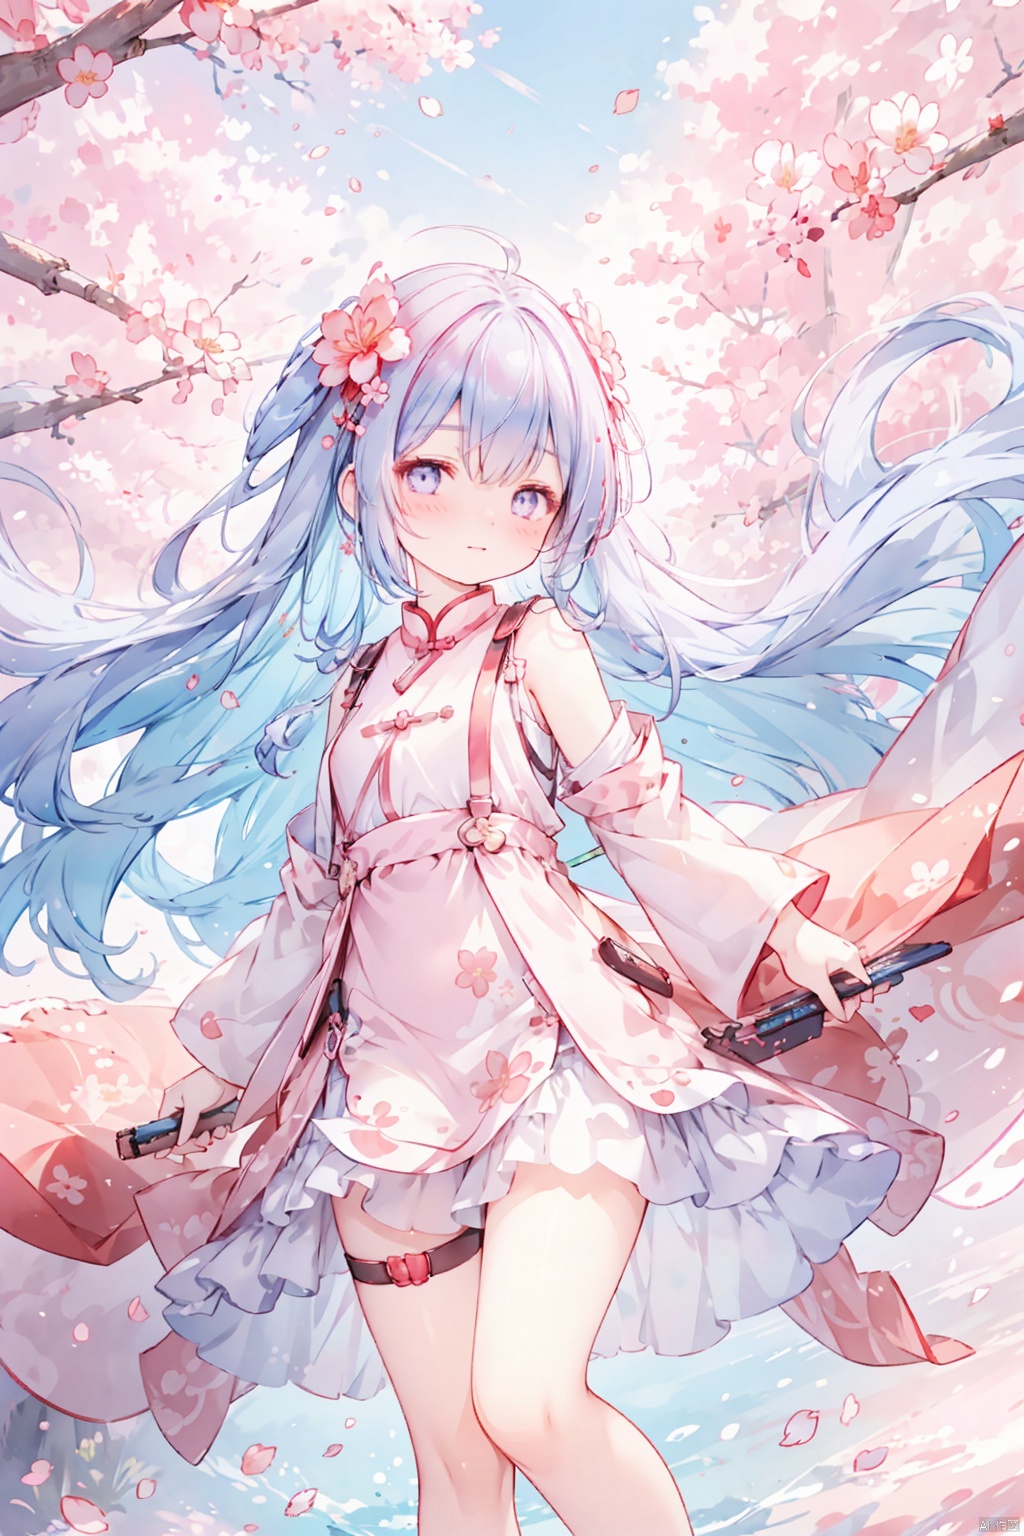 Chinese style, a girl wearing a floral dress with the image of cherry blossoms, bright atmosphere, sunshine, colorful eyes, long hair, floating hair, half open eyes, calves, suspenders, floating petals, blushing, focus, solo